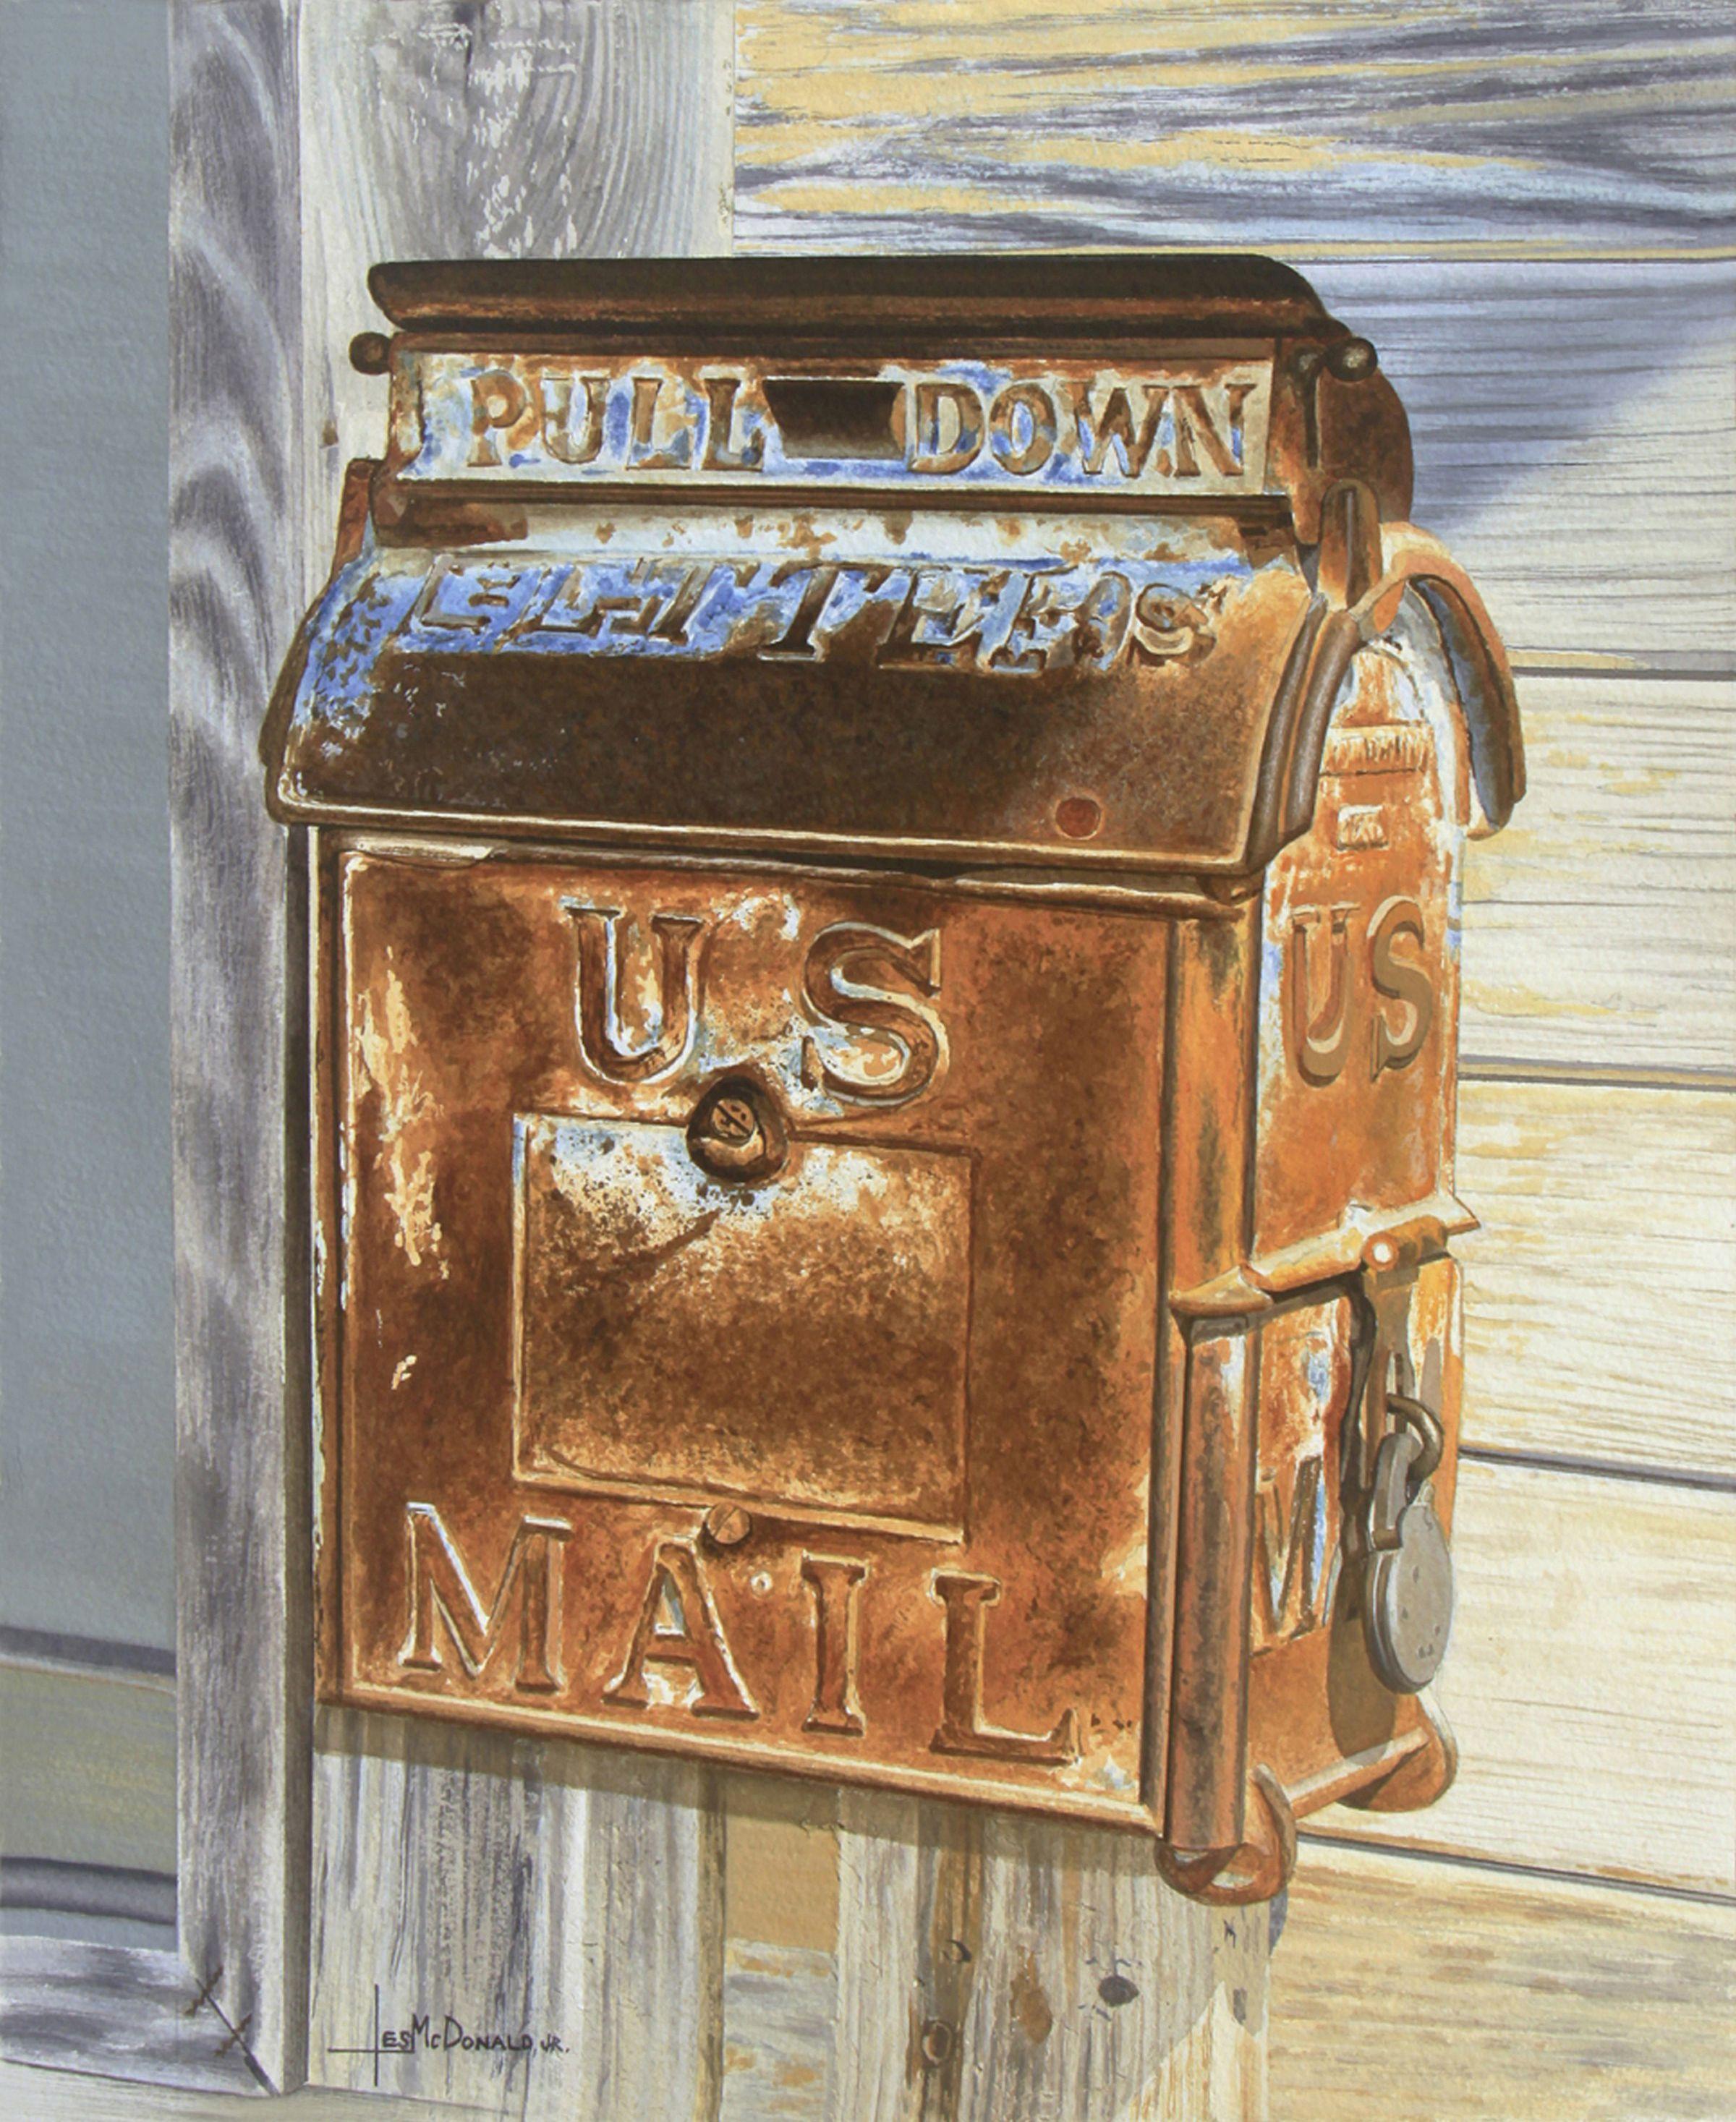 US Mail, Painting, Watercolor on Watercolor Paper - Art by Leslie McDonald Jr